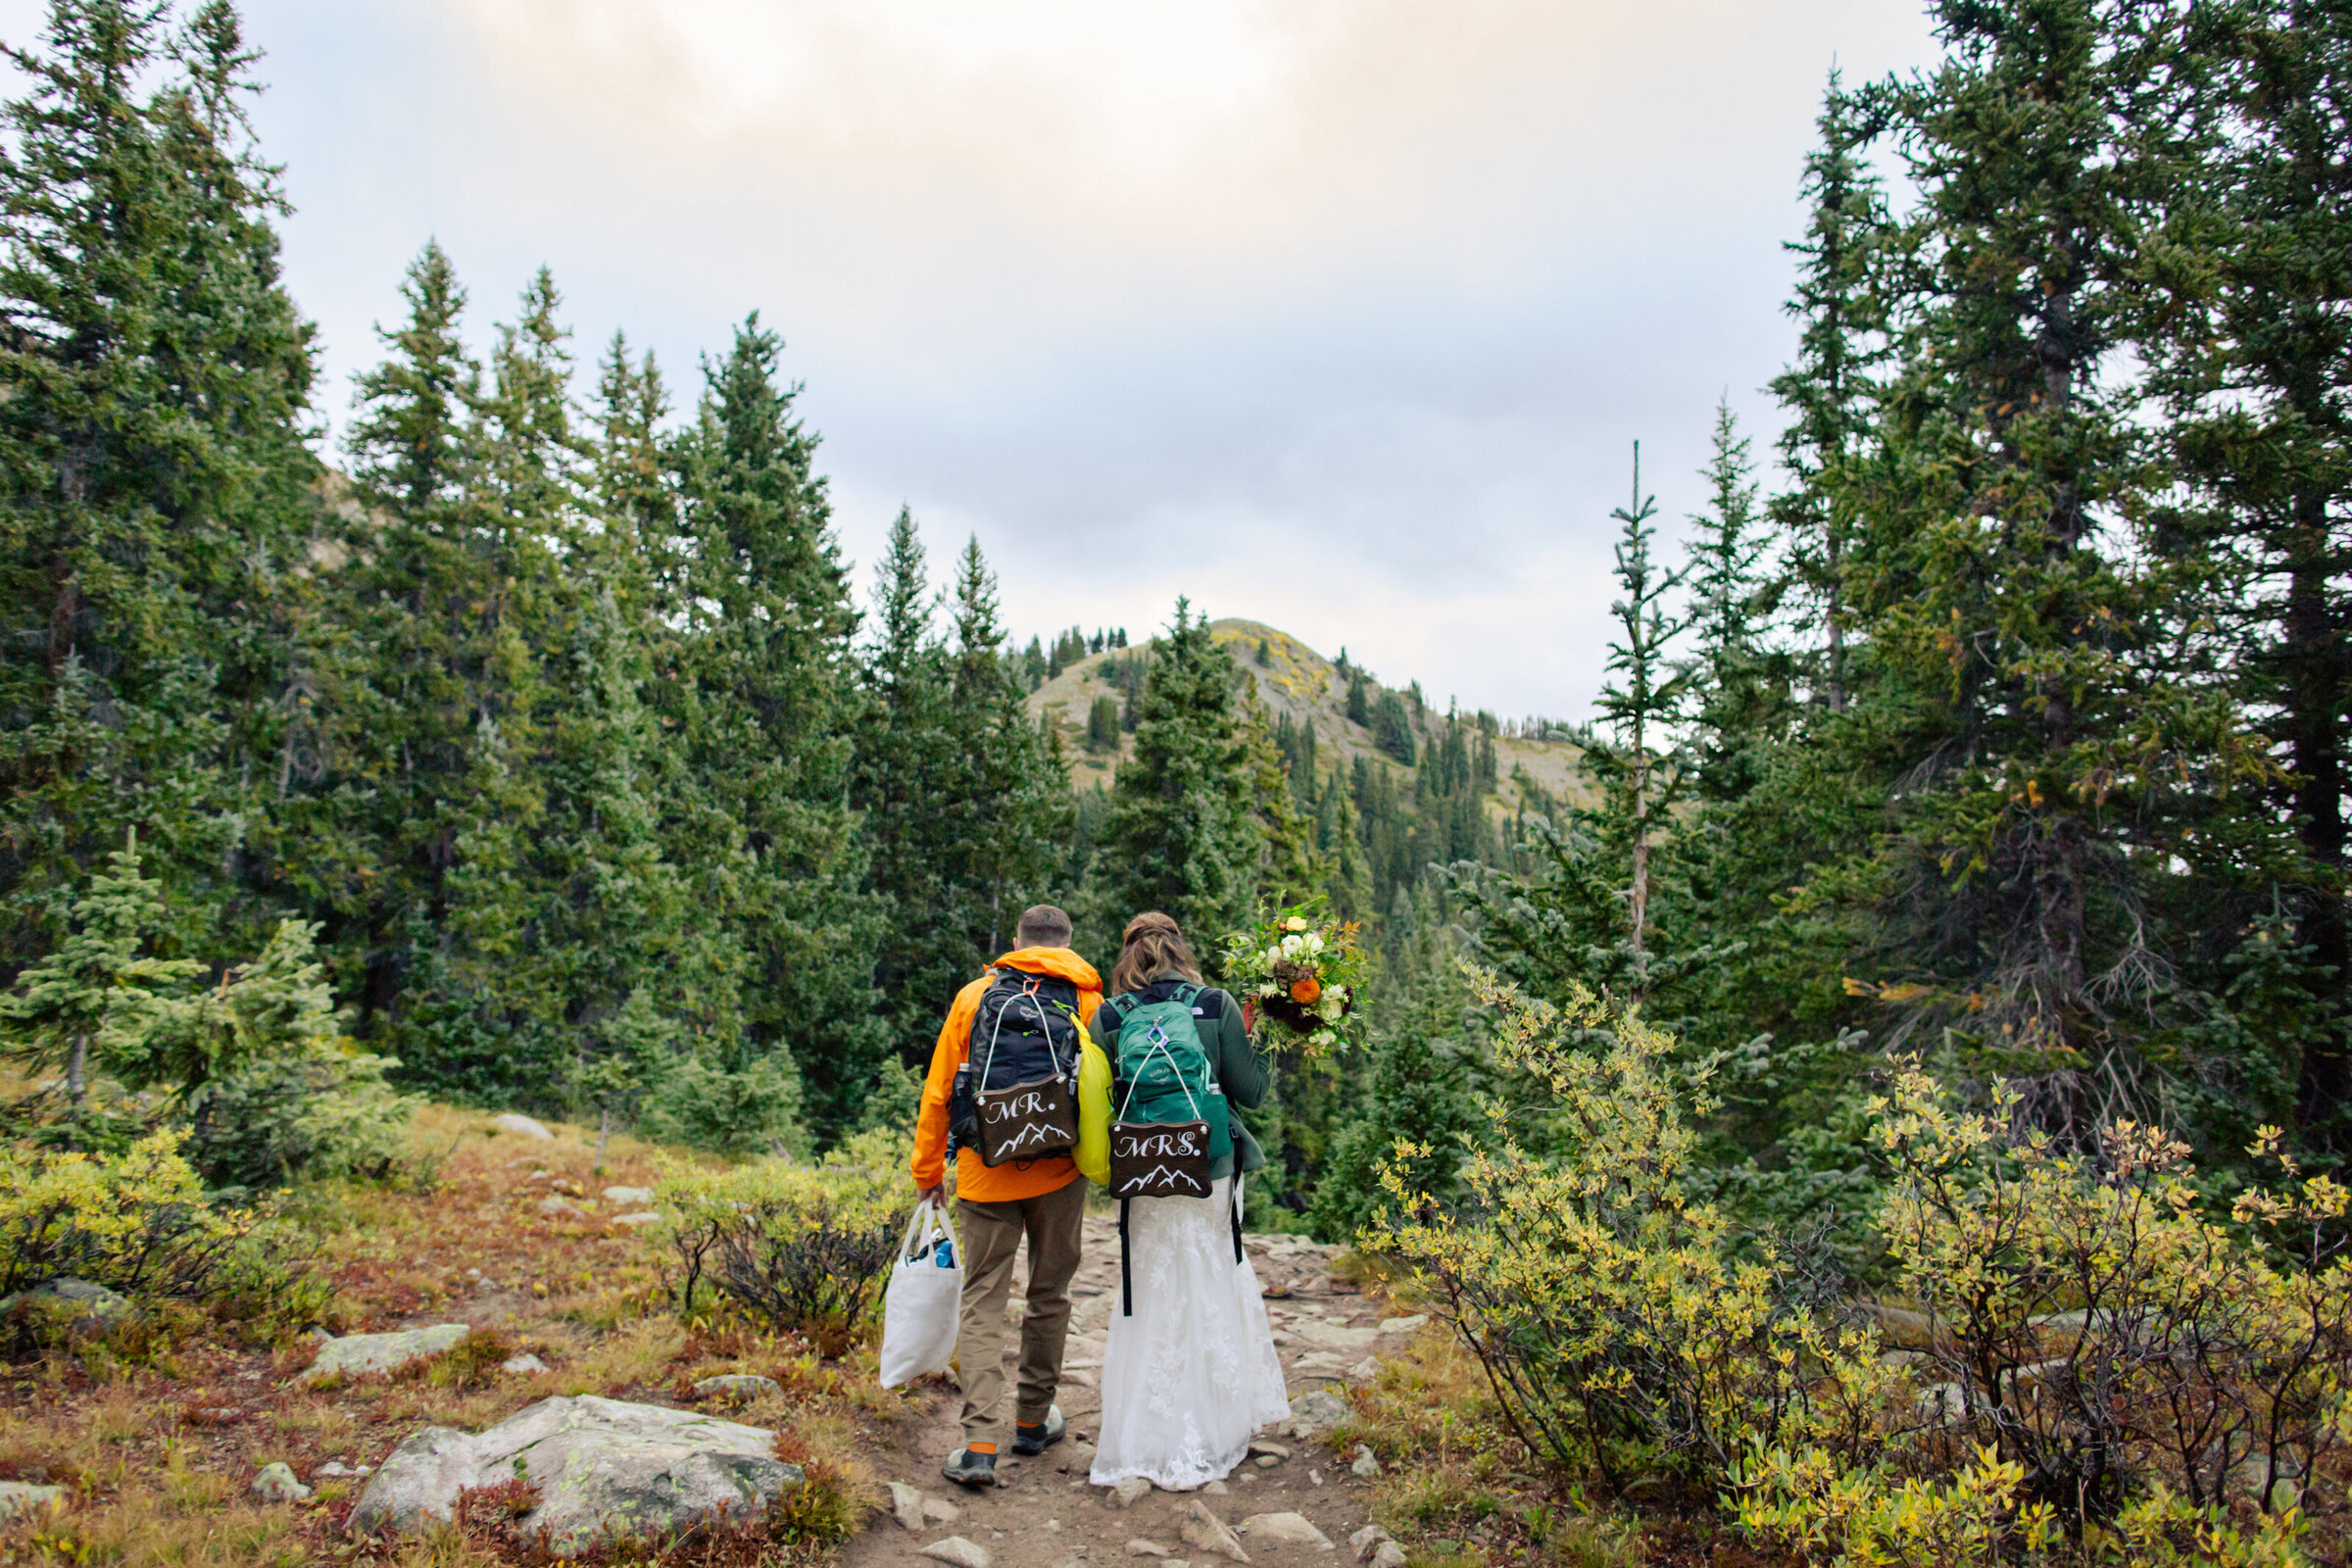 Bride and groom hike along a trail for their elopement while wearing "Mr. and Mrs. signs on their backpacks"